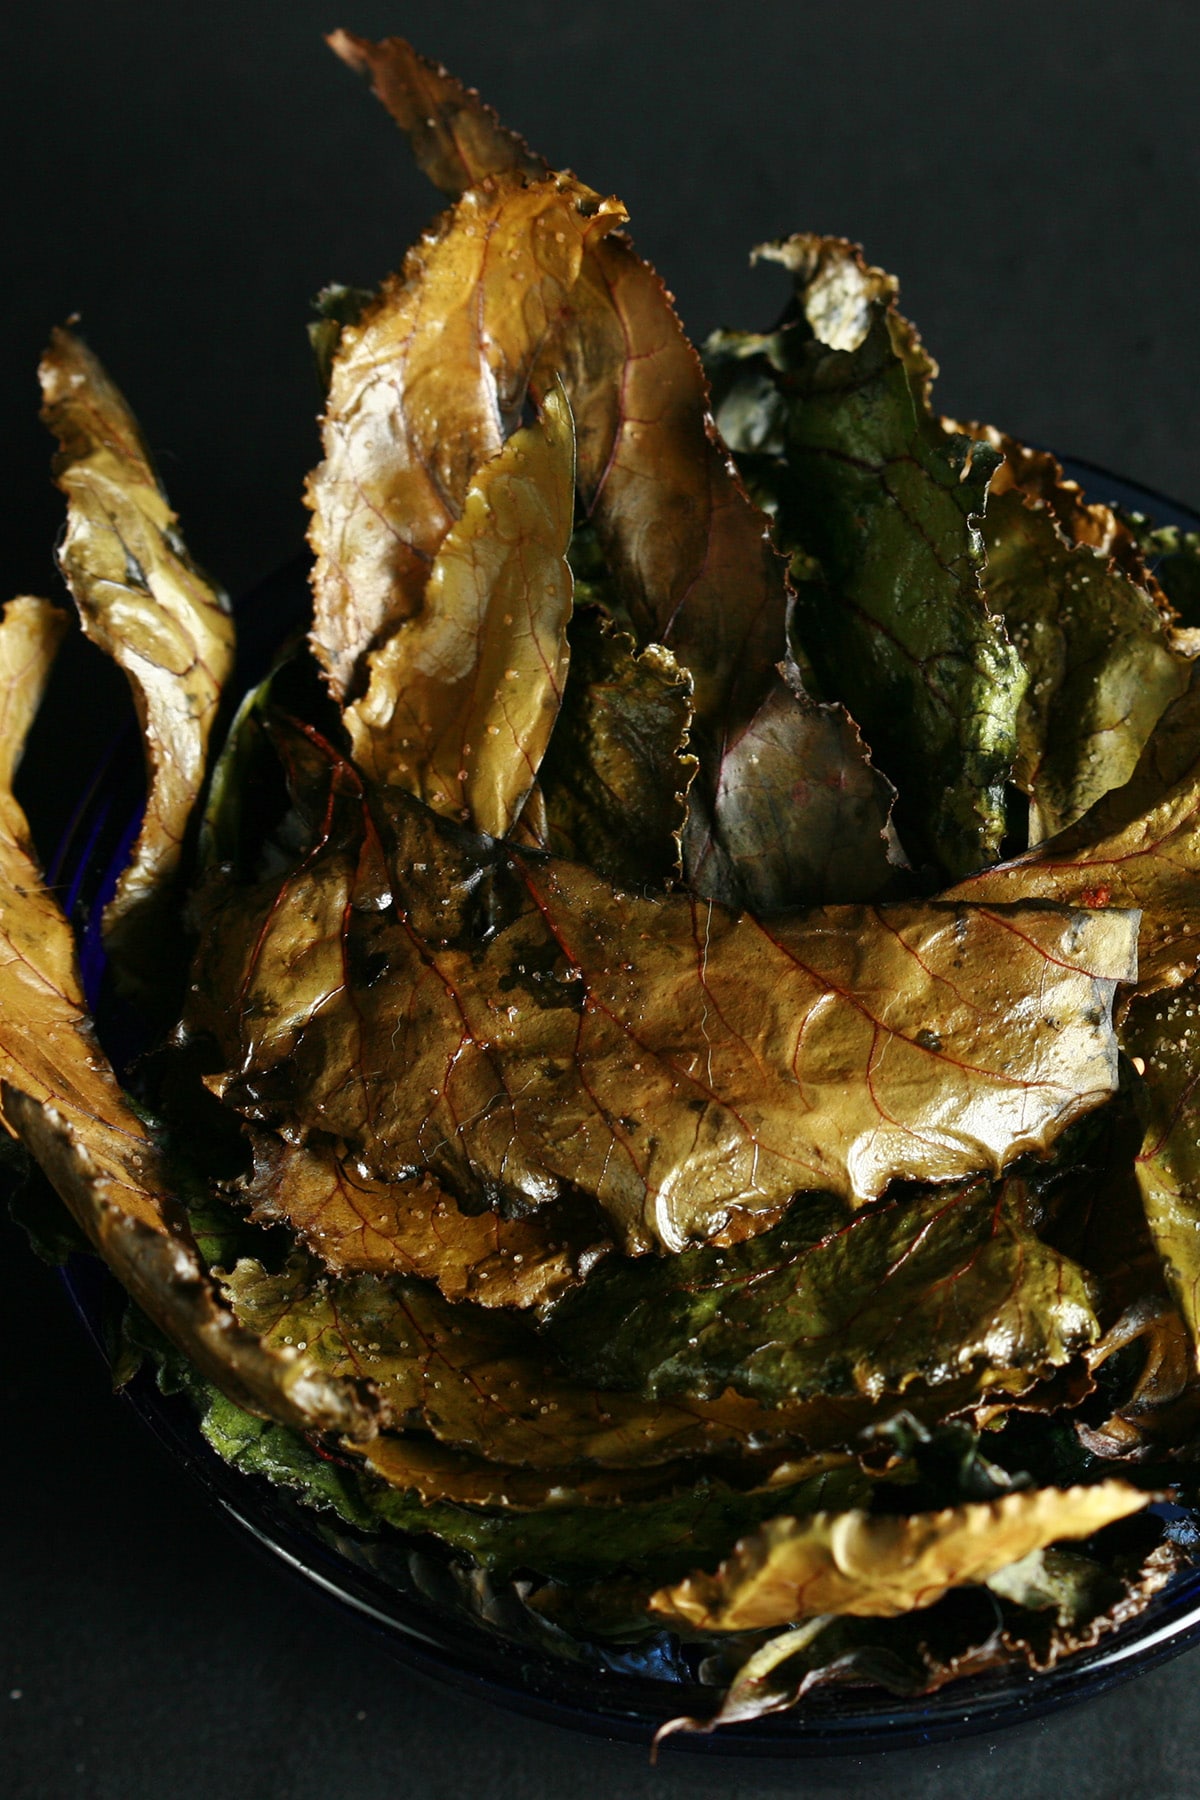 A bowl of roasted beet green chips - deep shades of greens and browns, with beautiful red veining.